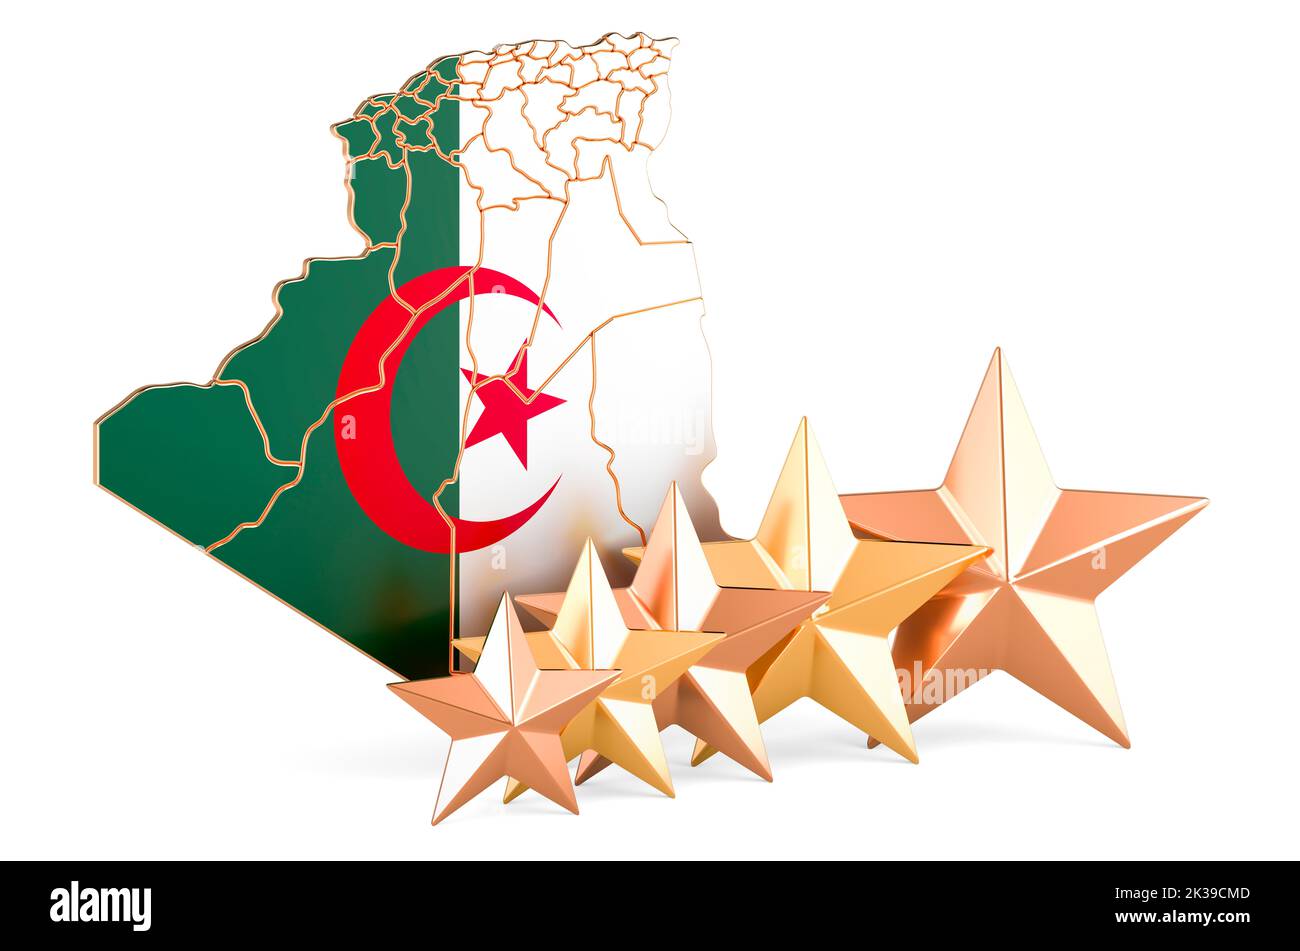 Algerian map with five stars. Rating, quality, service in Algeria. 3D rendering isolated on white background Stock Photo